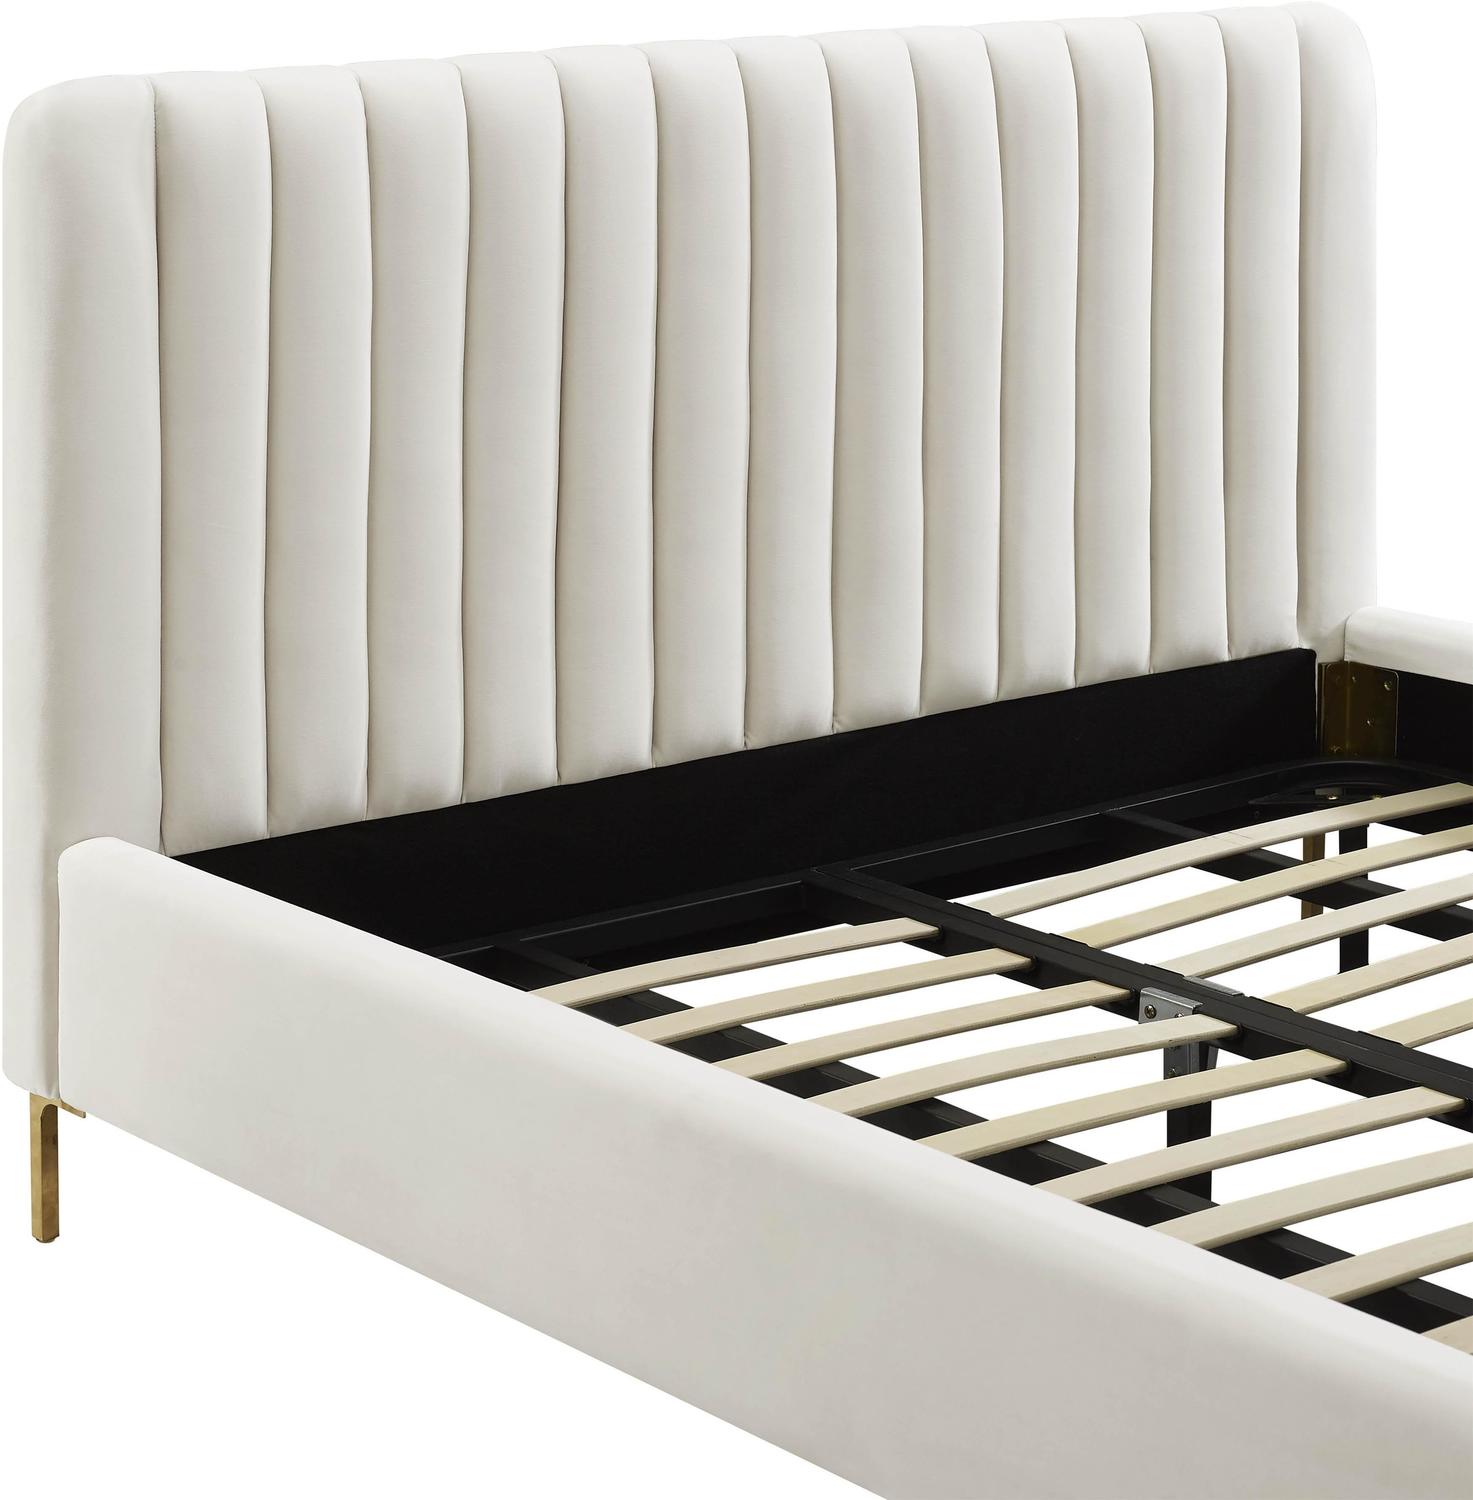 double platform bed with headboard Contemporary Design Furniture Beds Cream